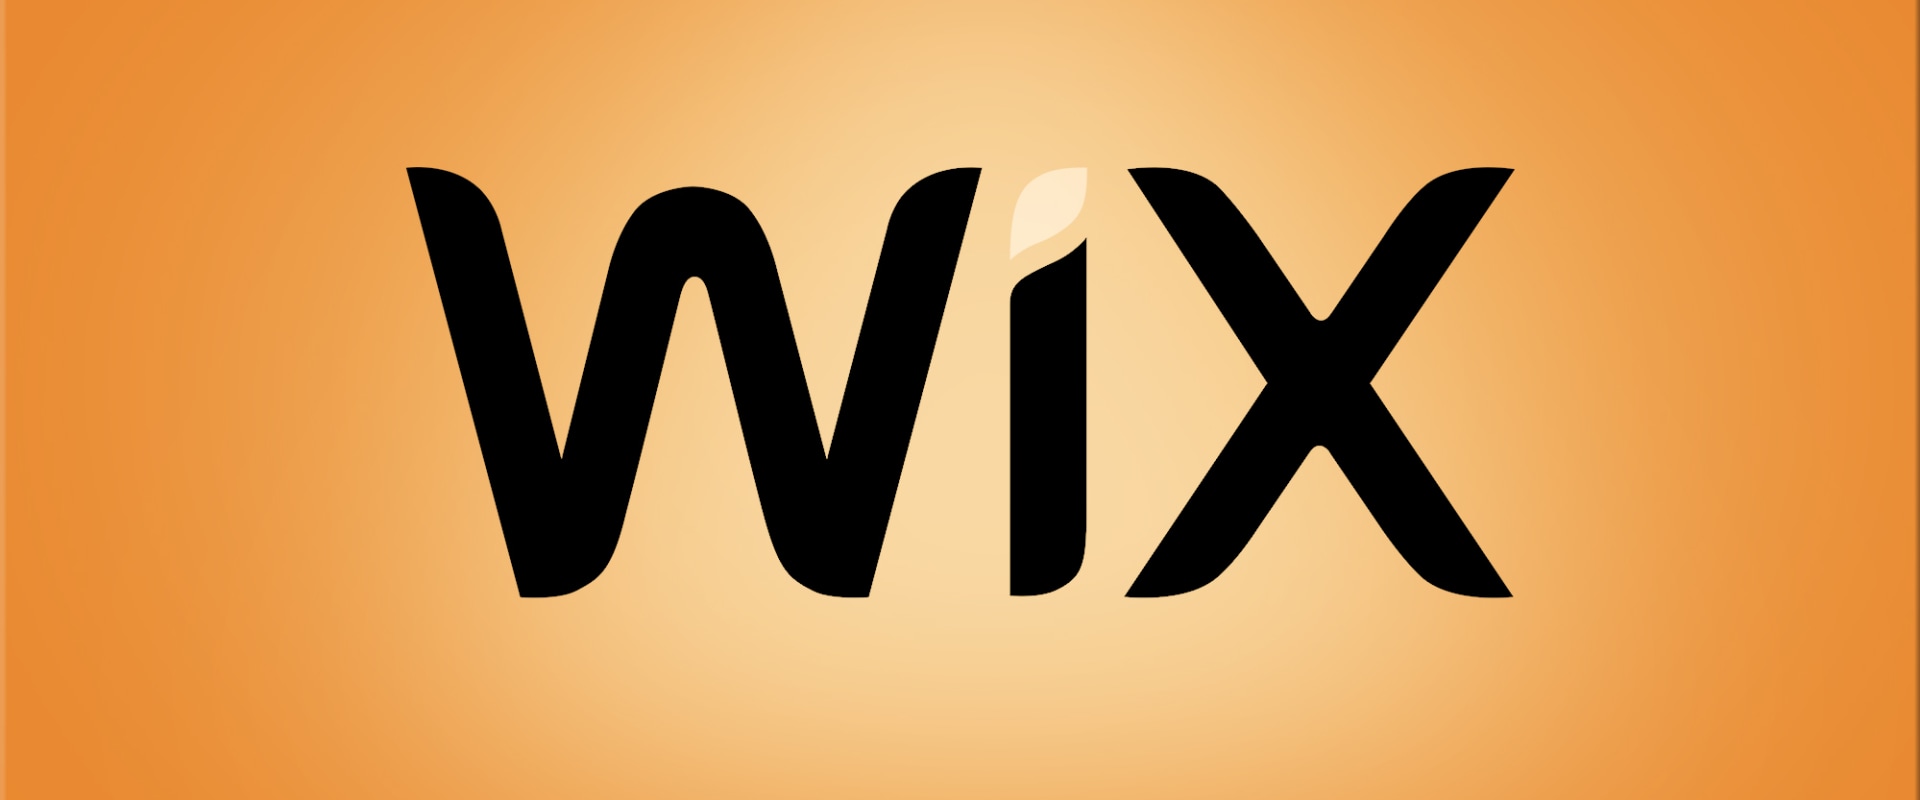 Is Wix the Best Website Builder for Small Businesses?